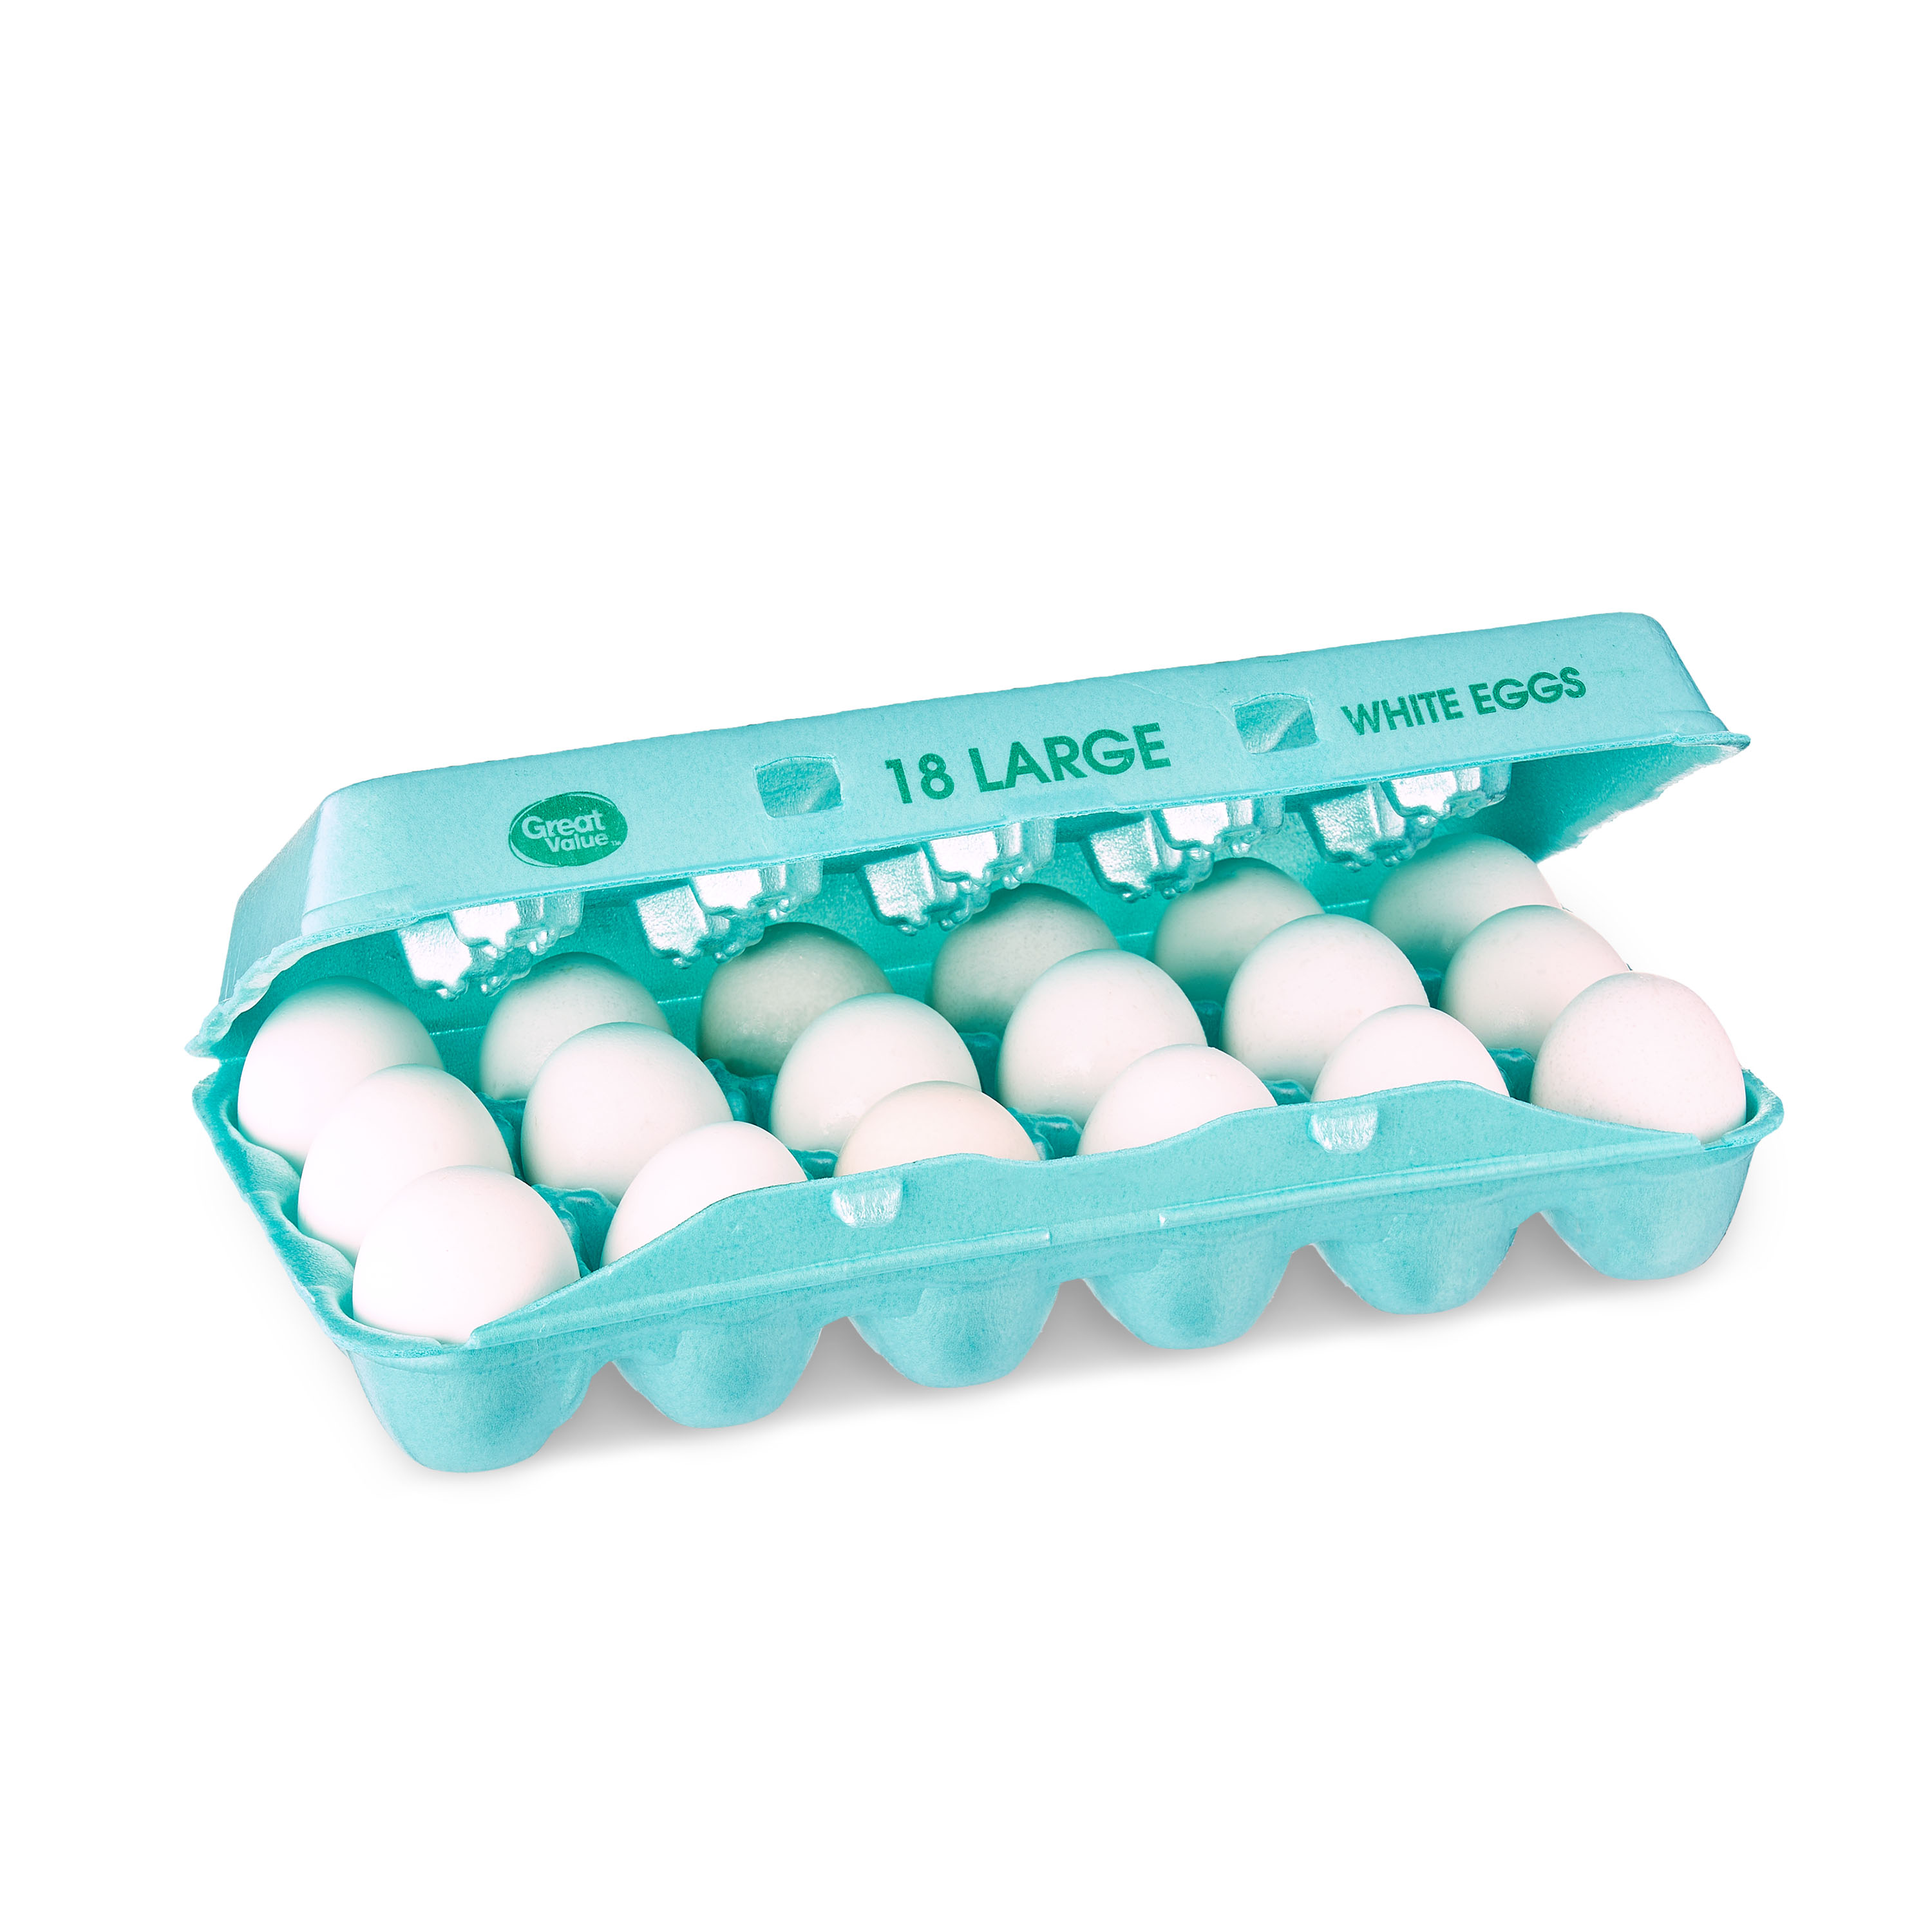 Great Value Large White Eggs, 18 Count - image 3 of 6